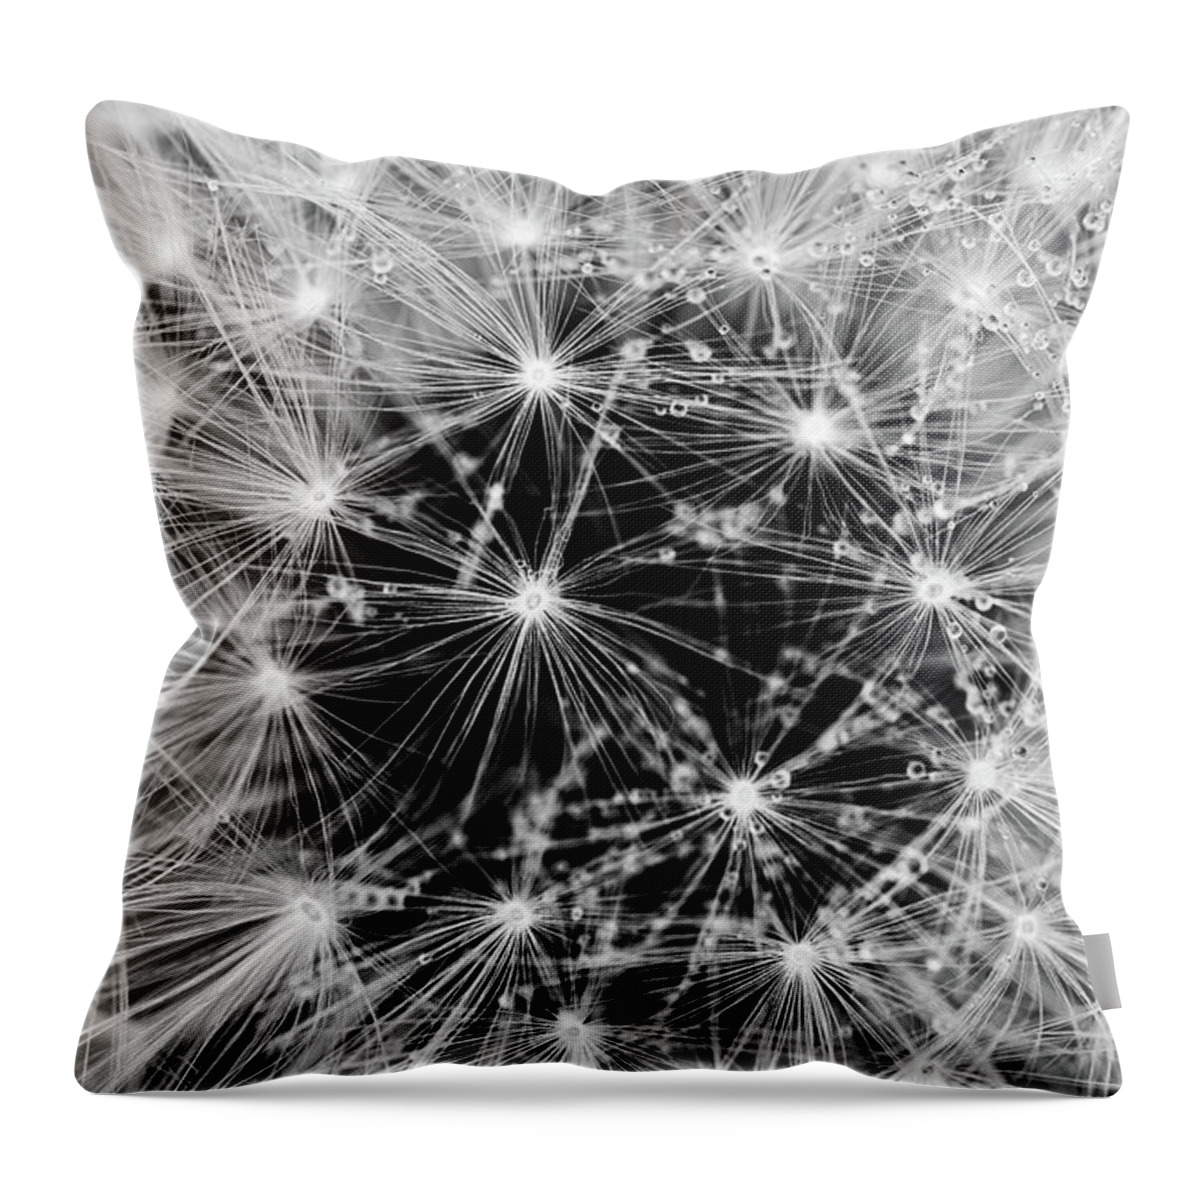 Dandelion Throw Pillow featuring the photograph Dandelion Dew by Michael Hubley